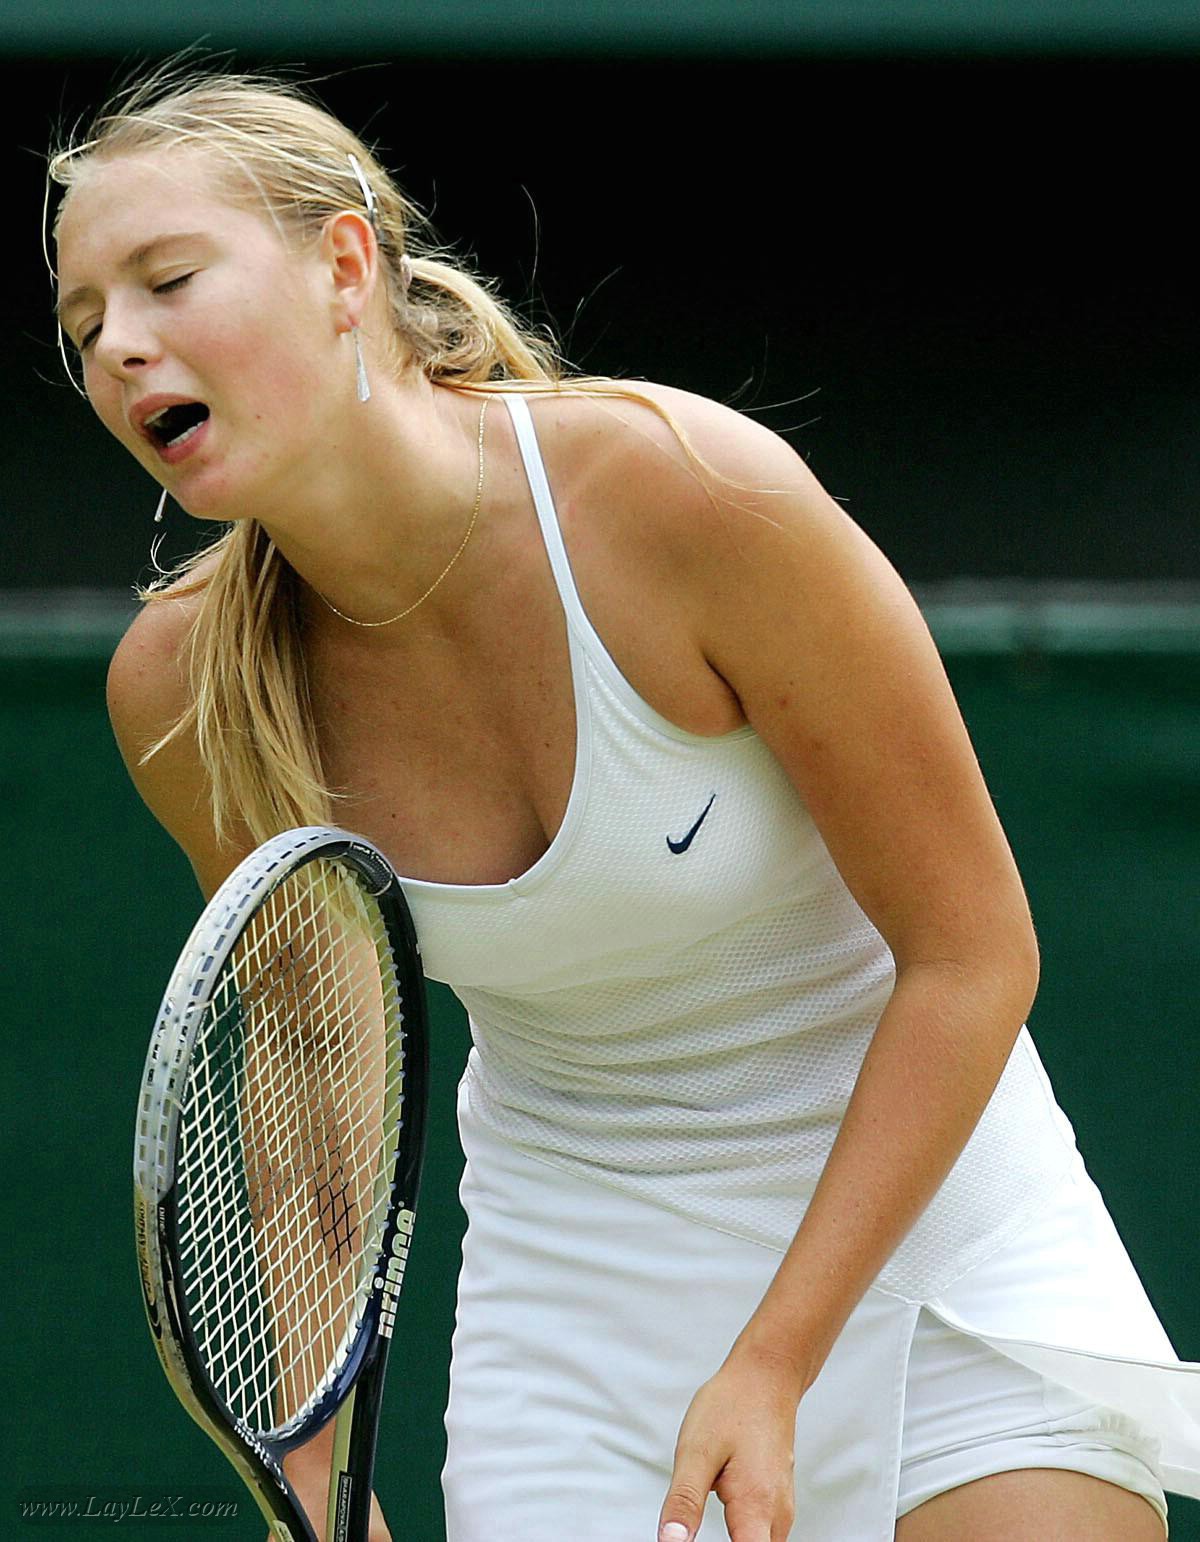 Female Tennis Players Revealing A Little Too Much